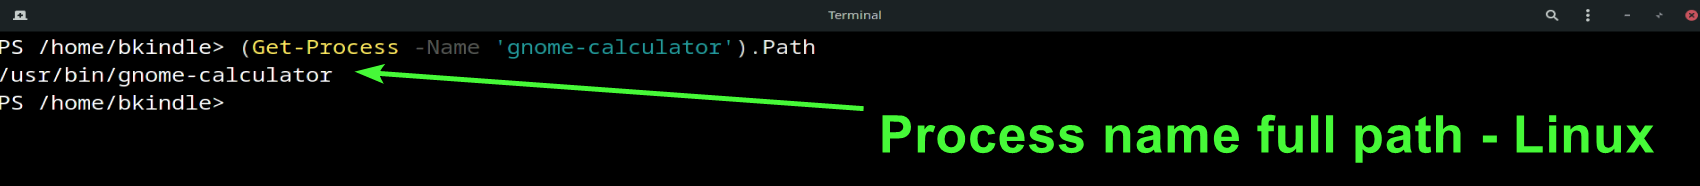 Using Powershell Get-Process to display a process's full file system path on Linux.